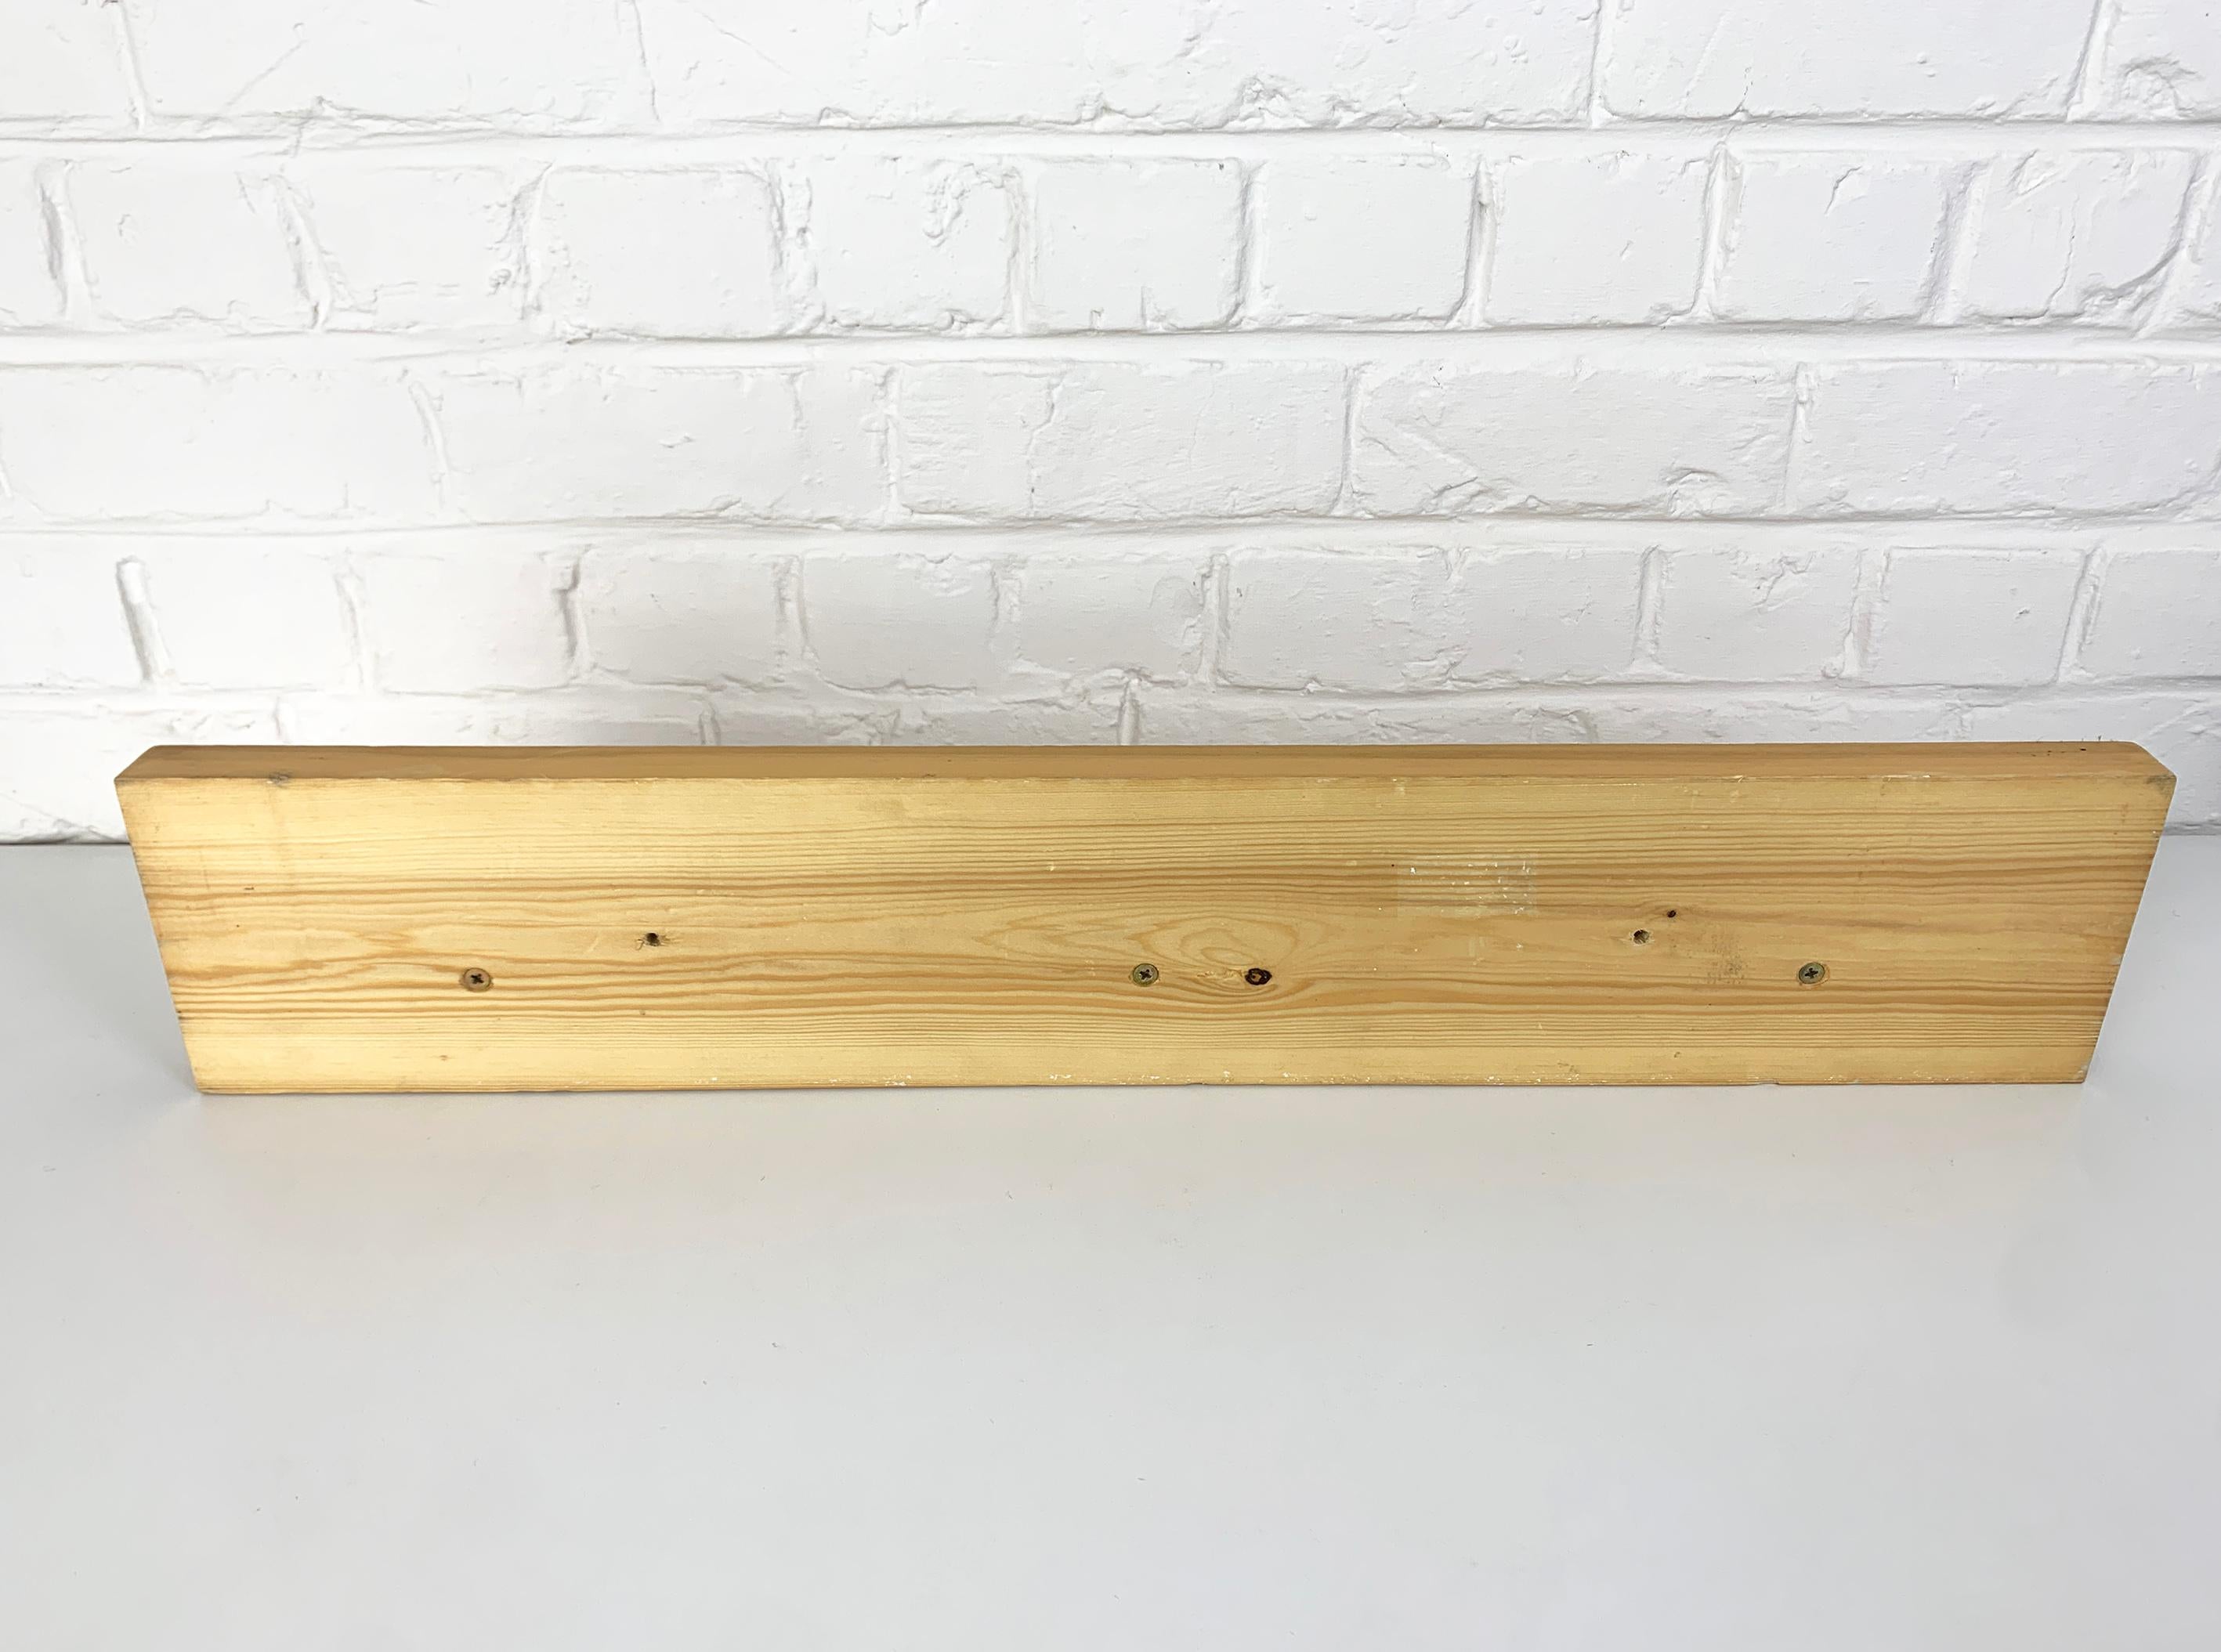 French Coat Rack by Charlotte Perriand for Les Arcs, Pinewood, 1960s - 3 avail. For Sale 6